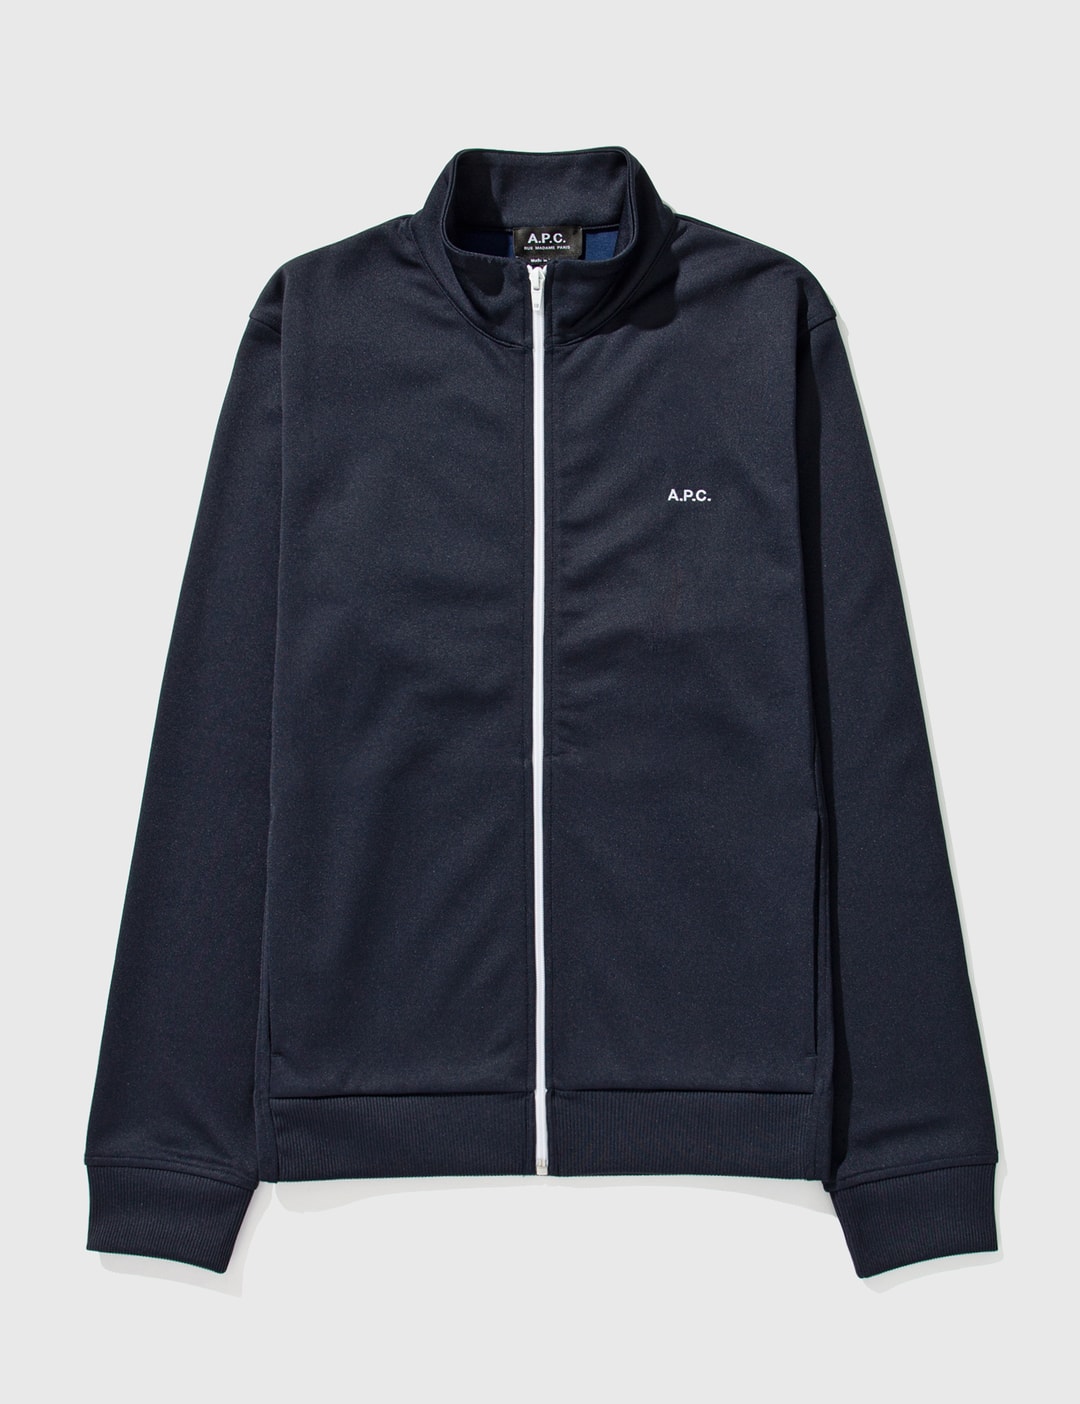 A.P.C. - Jim Jacket | HBX - Globally Curated Fashion and Lifestyle by ...